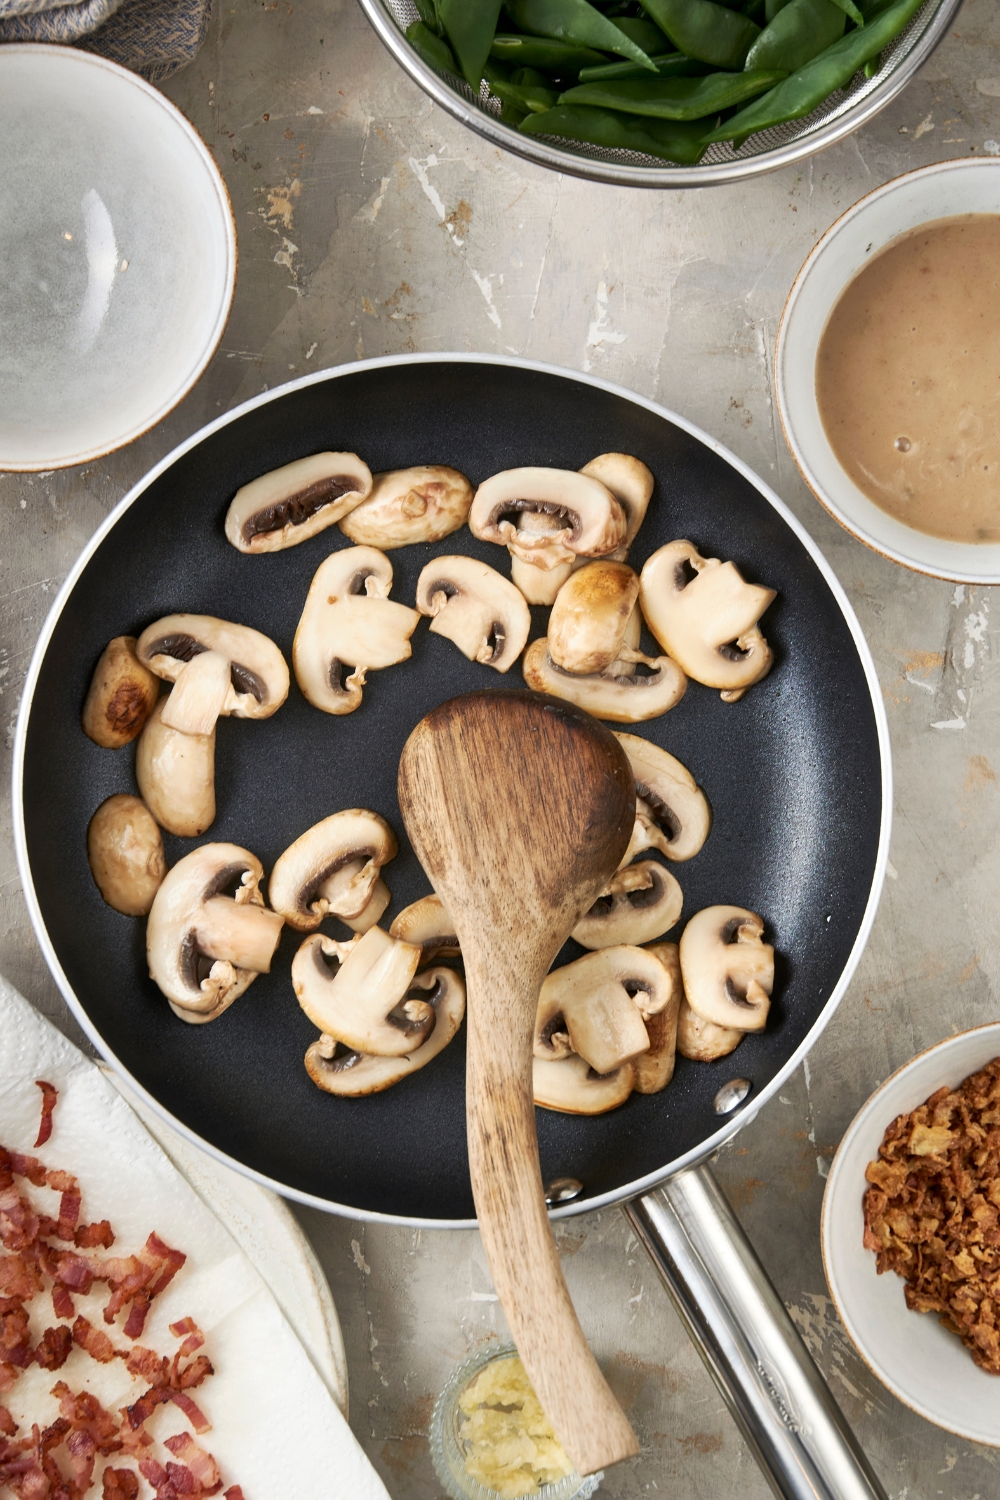 Sliced white mushrooms are cooking in a black frying pan. A wooden spoon rests in the pan.